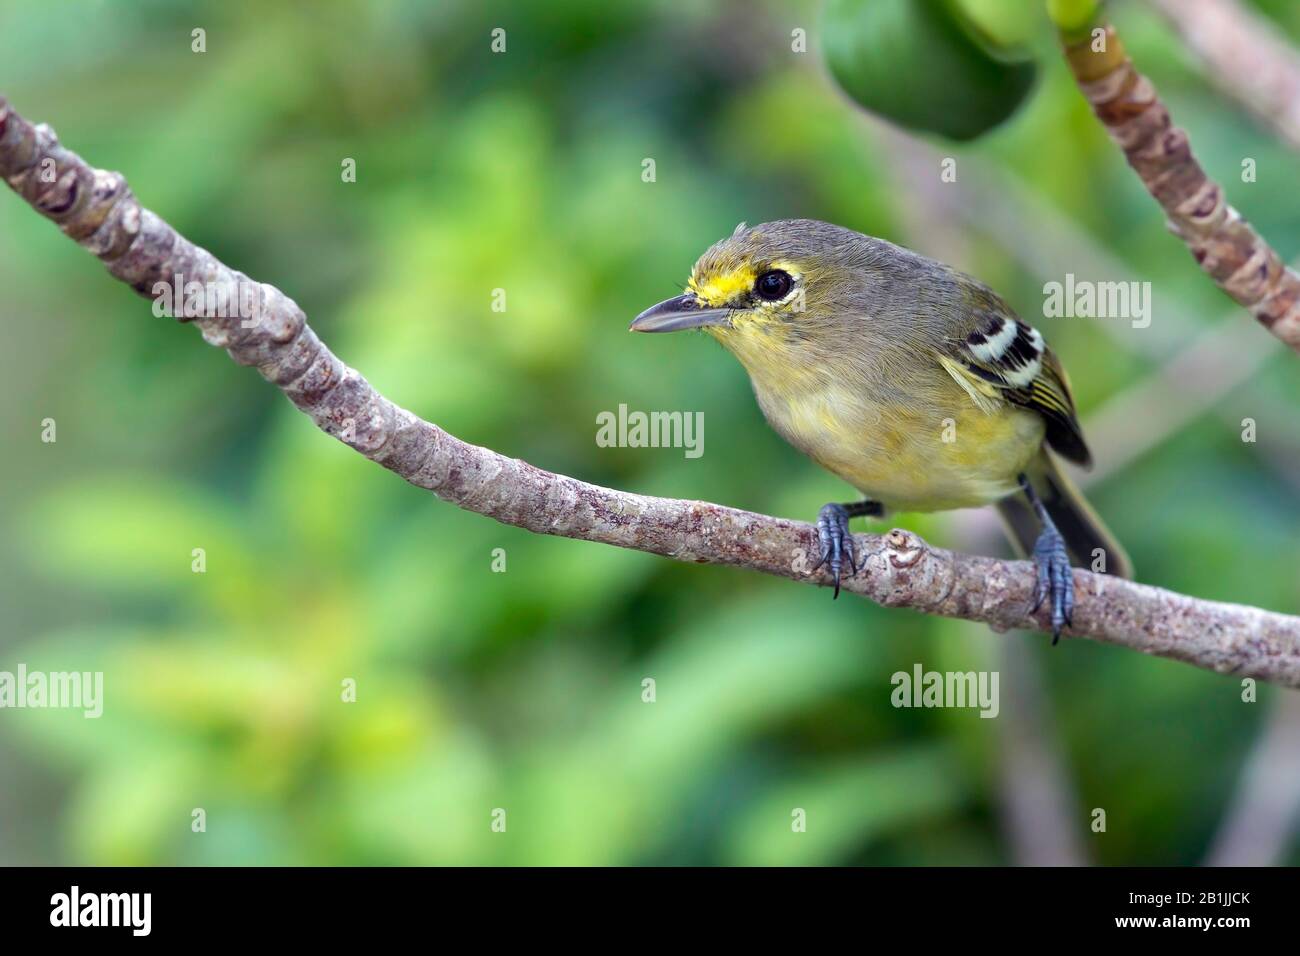 thick-billed vireo (Vireo crassirostris), on a branch, The Bahamas Stock Photo